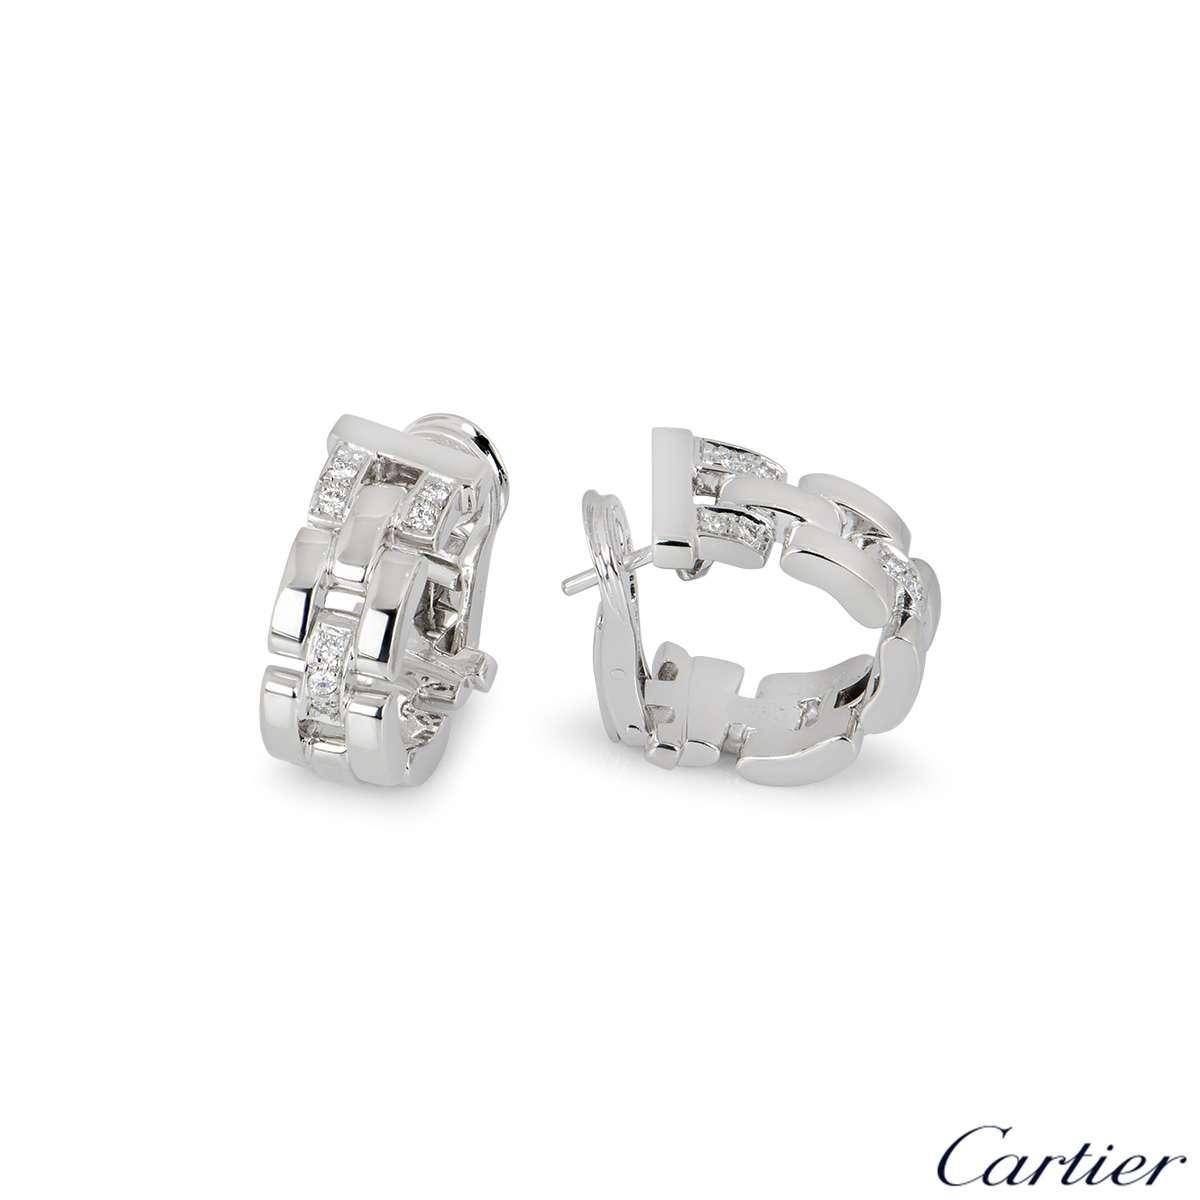 A pair of 18k white gold Maillon Panthere earrings by Cartier. Each hoop style earring is made up of iconic flat white gold solid links with 3 pave set diamond intersections, totalling approximately 0.20ct. The earrings have posts and lever hinge